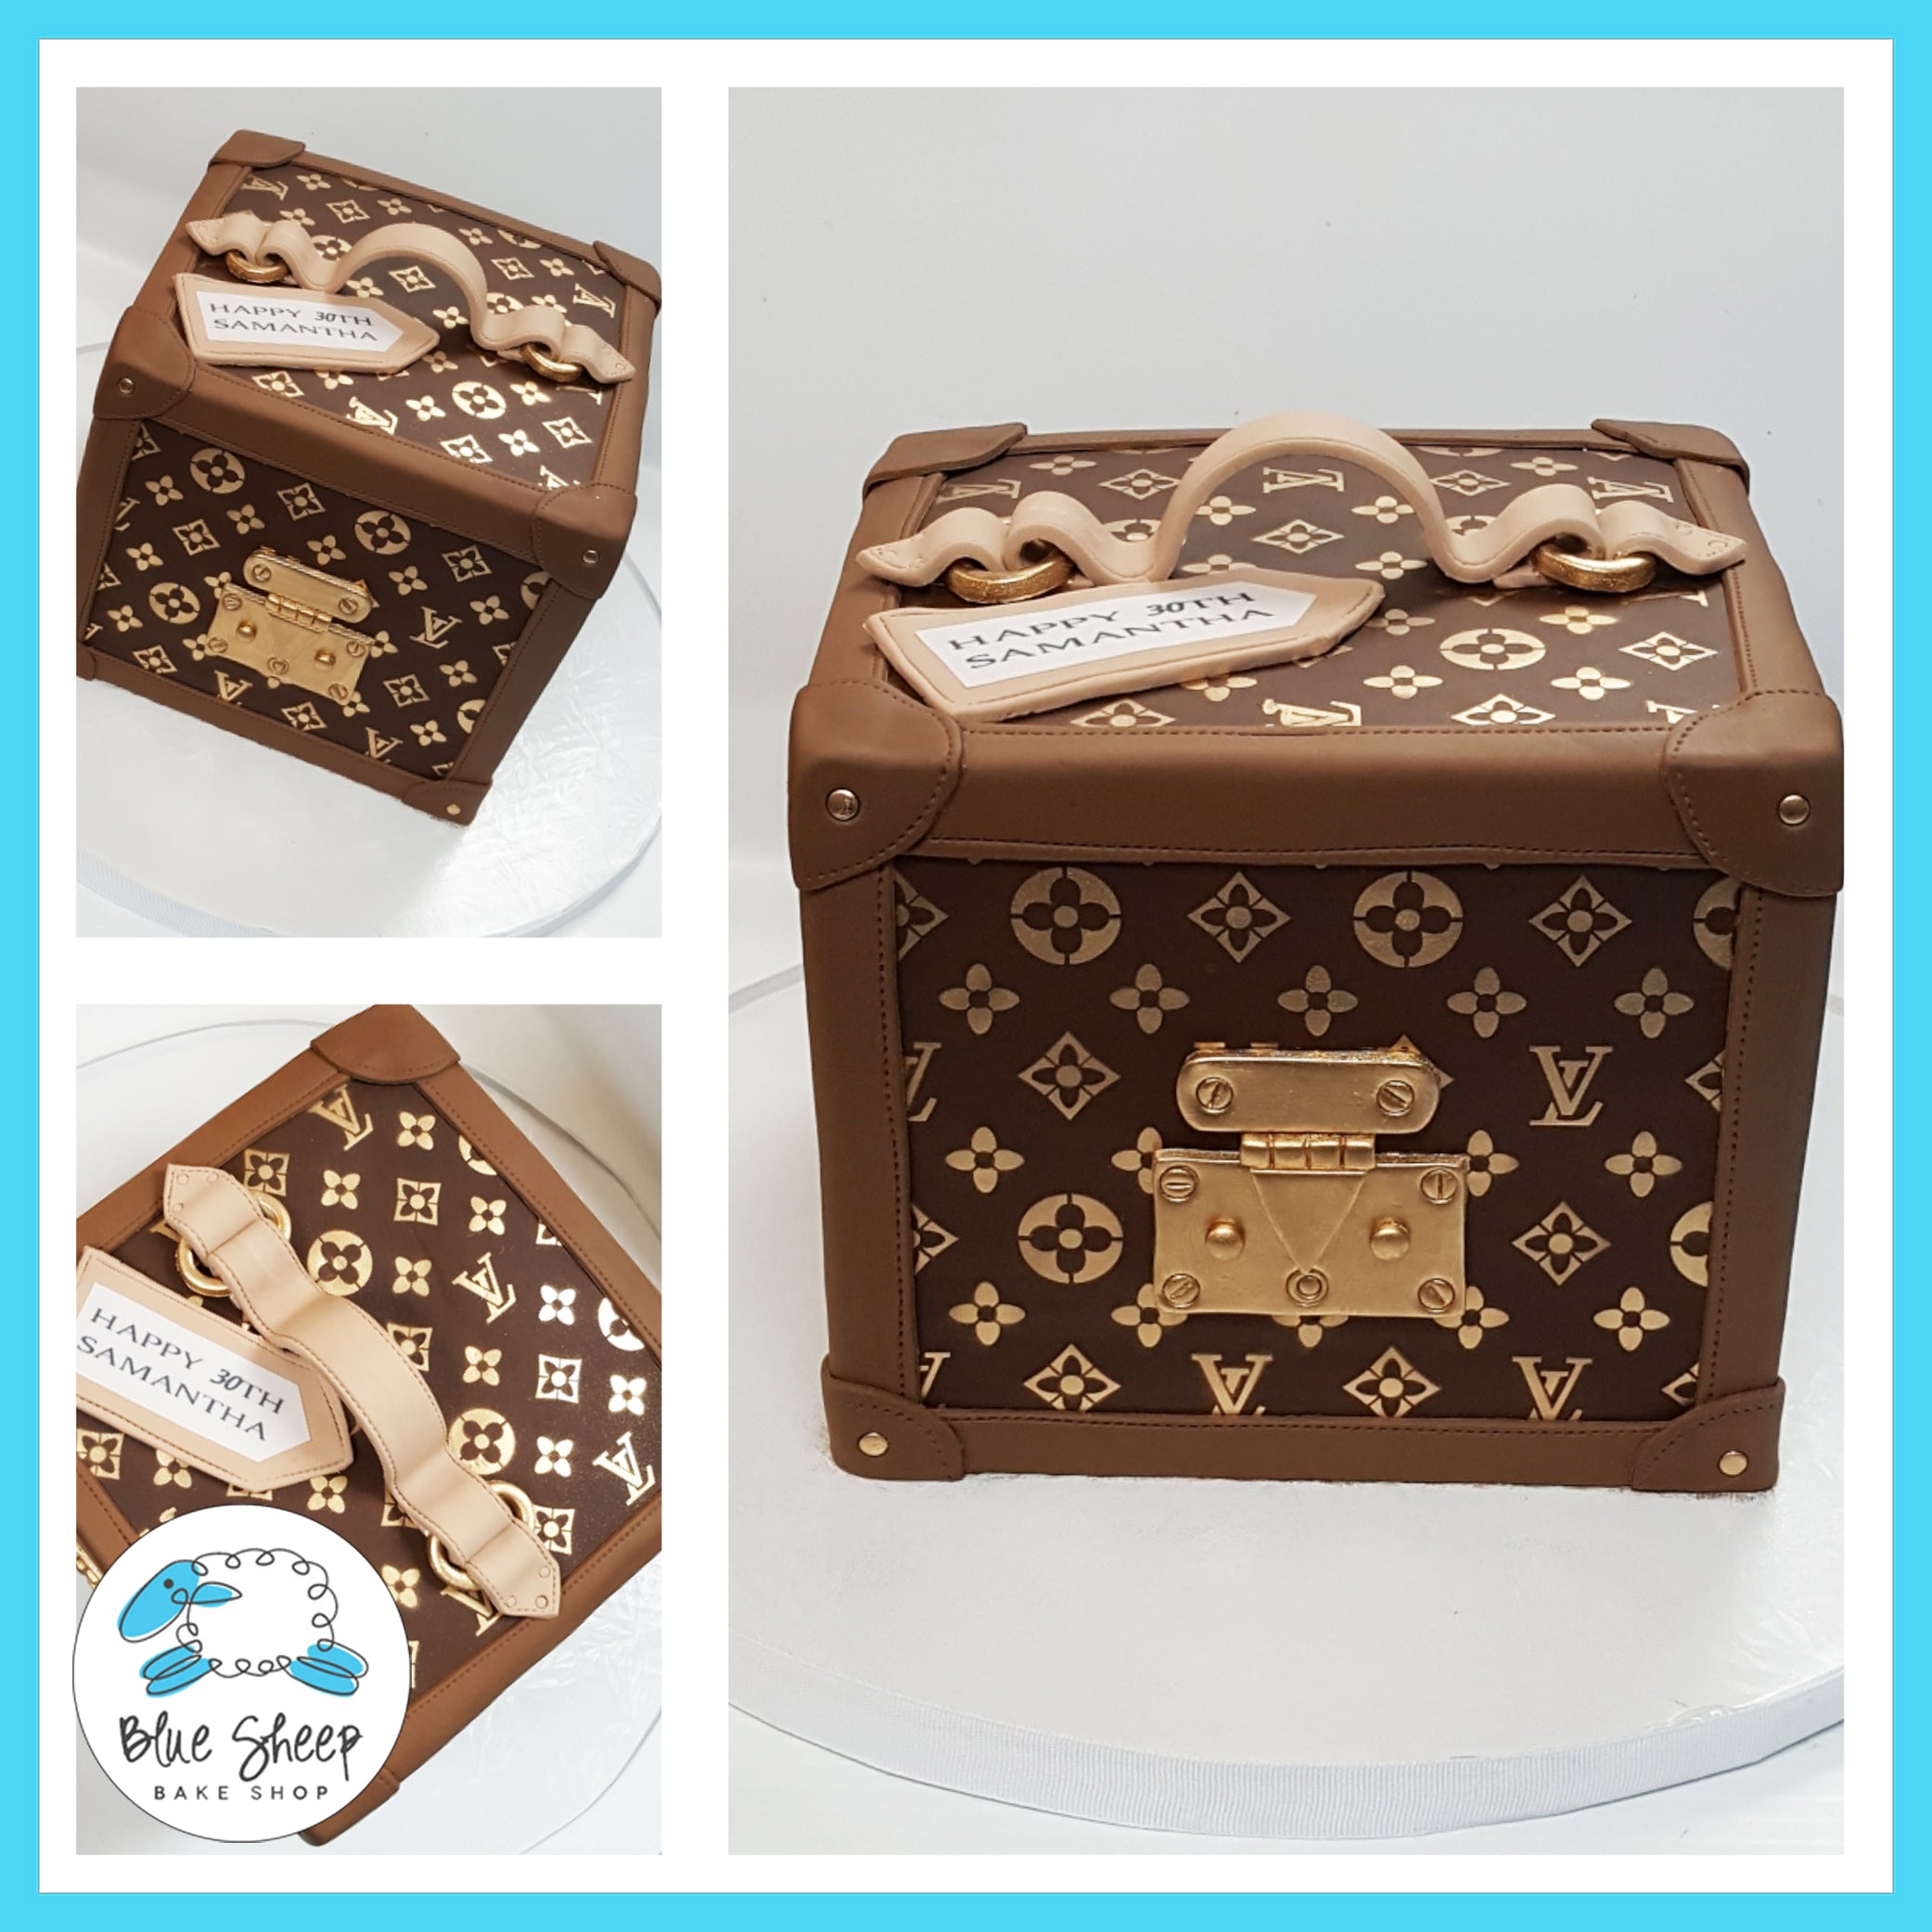 Louis Vuitton Cupcakes - Cupcakes and Custom Cakes by Blue Sheep